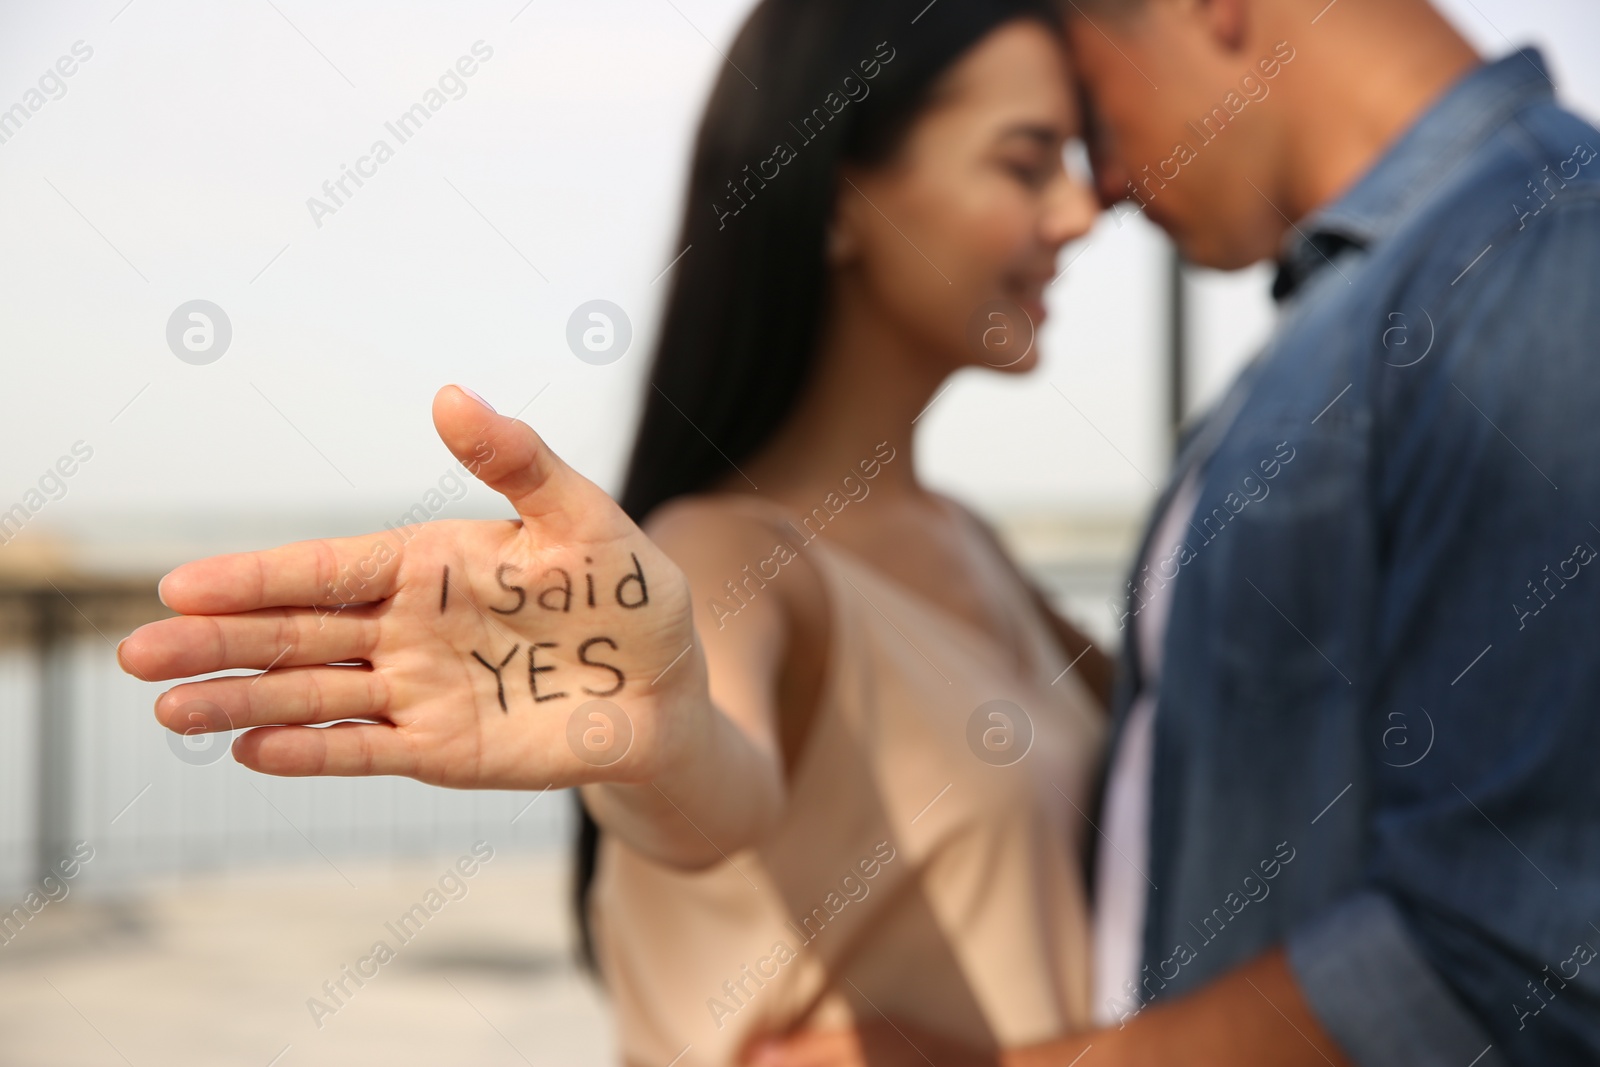 Photo of Woman with text I SAID YES written on palm and her boyfriend after engagement outdoors, focus on hand